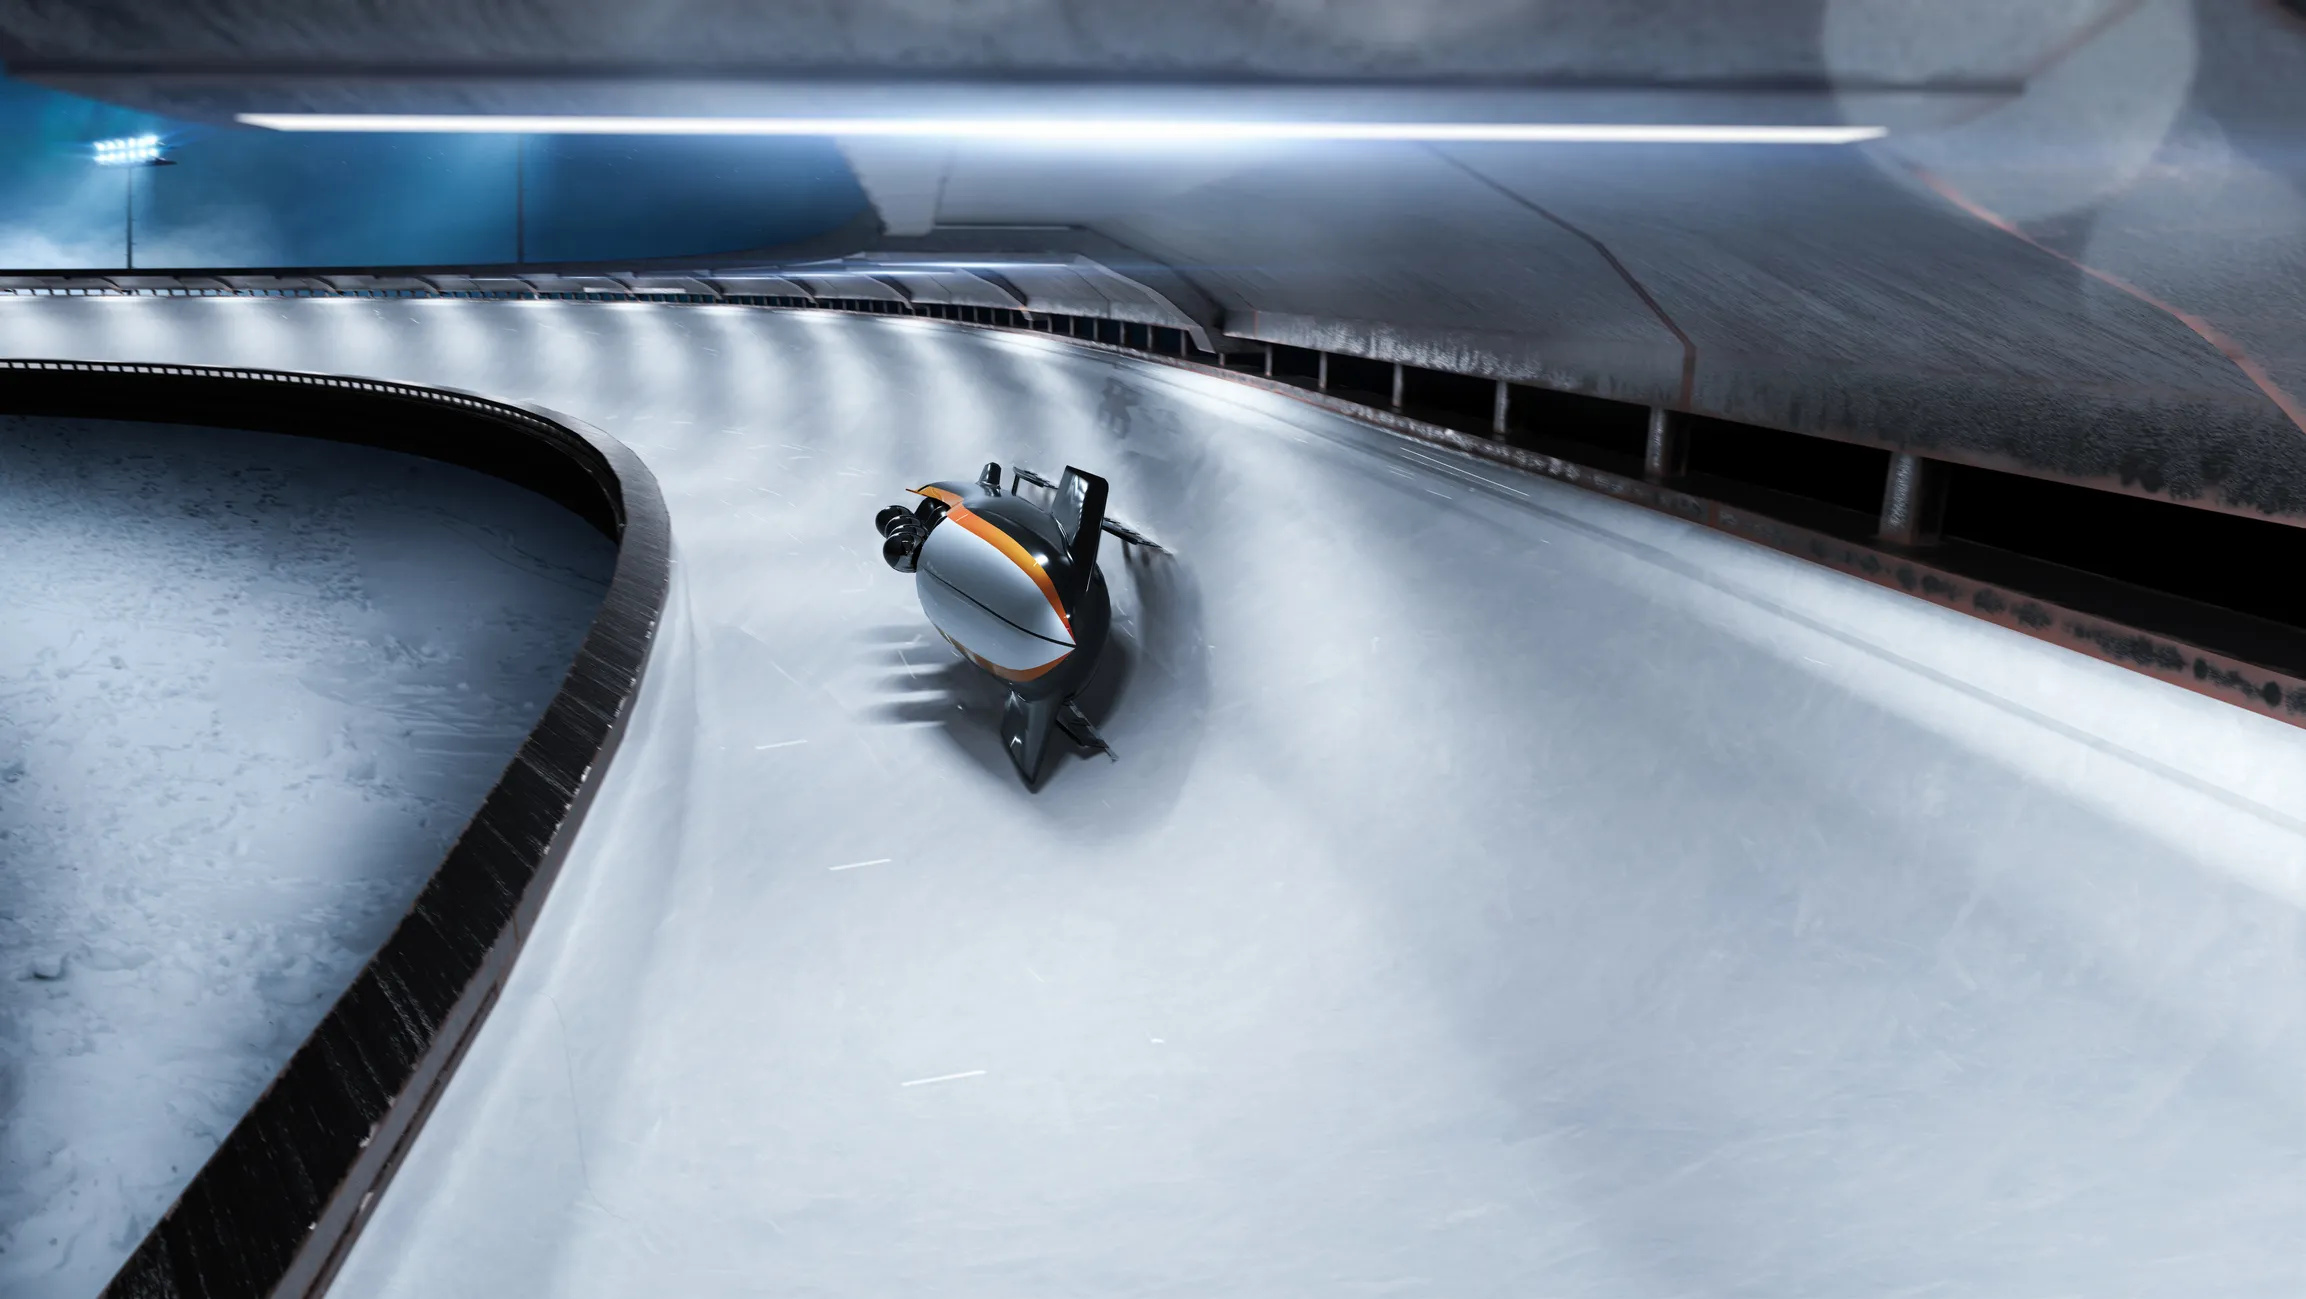 Bobsleigh: Kaillie Humphries during the mono bob race, A Canadian-American bobsledder. 2310x1300 HD Wallpaper.